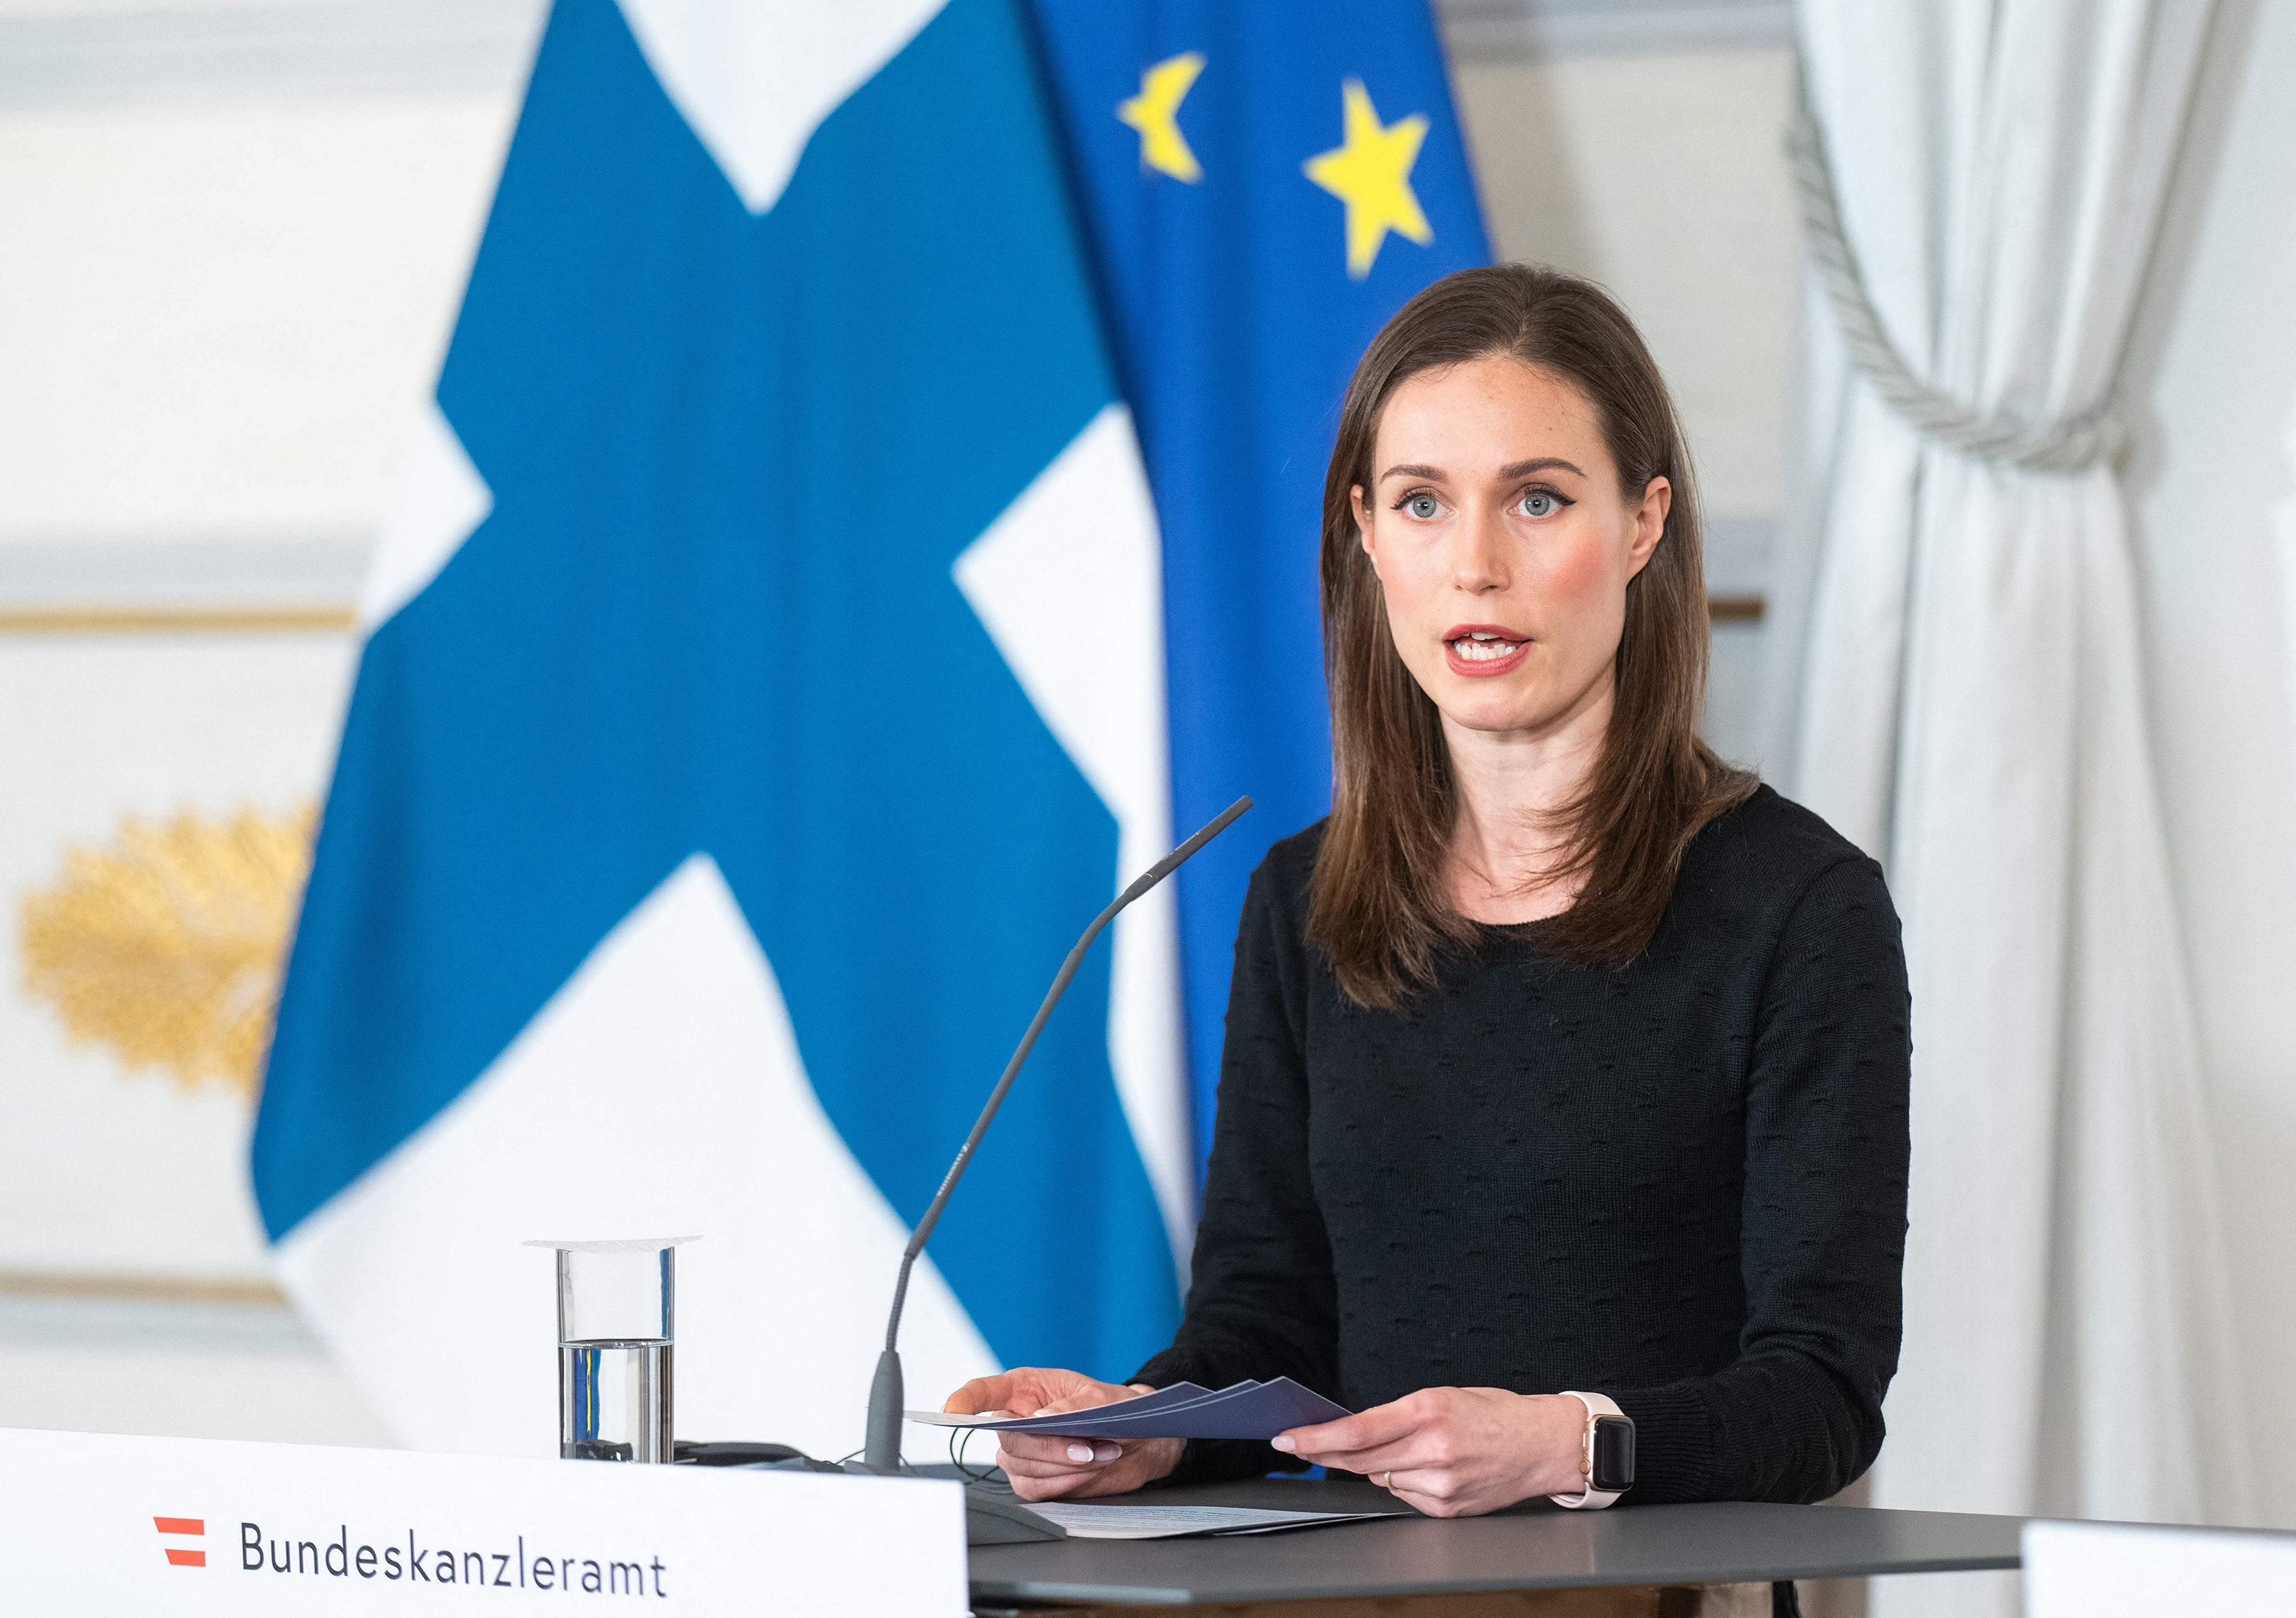 Finland's Prime Minister Sanna Marin speaks during a joint press conference with Austria's Chancellor in Vienna on February 17.